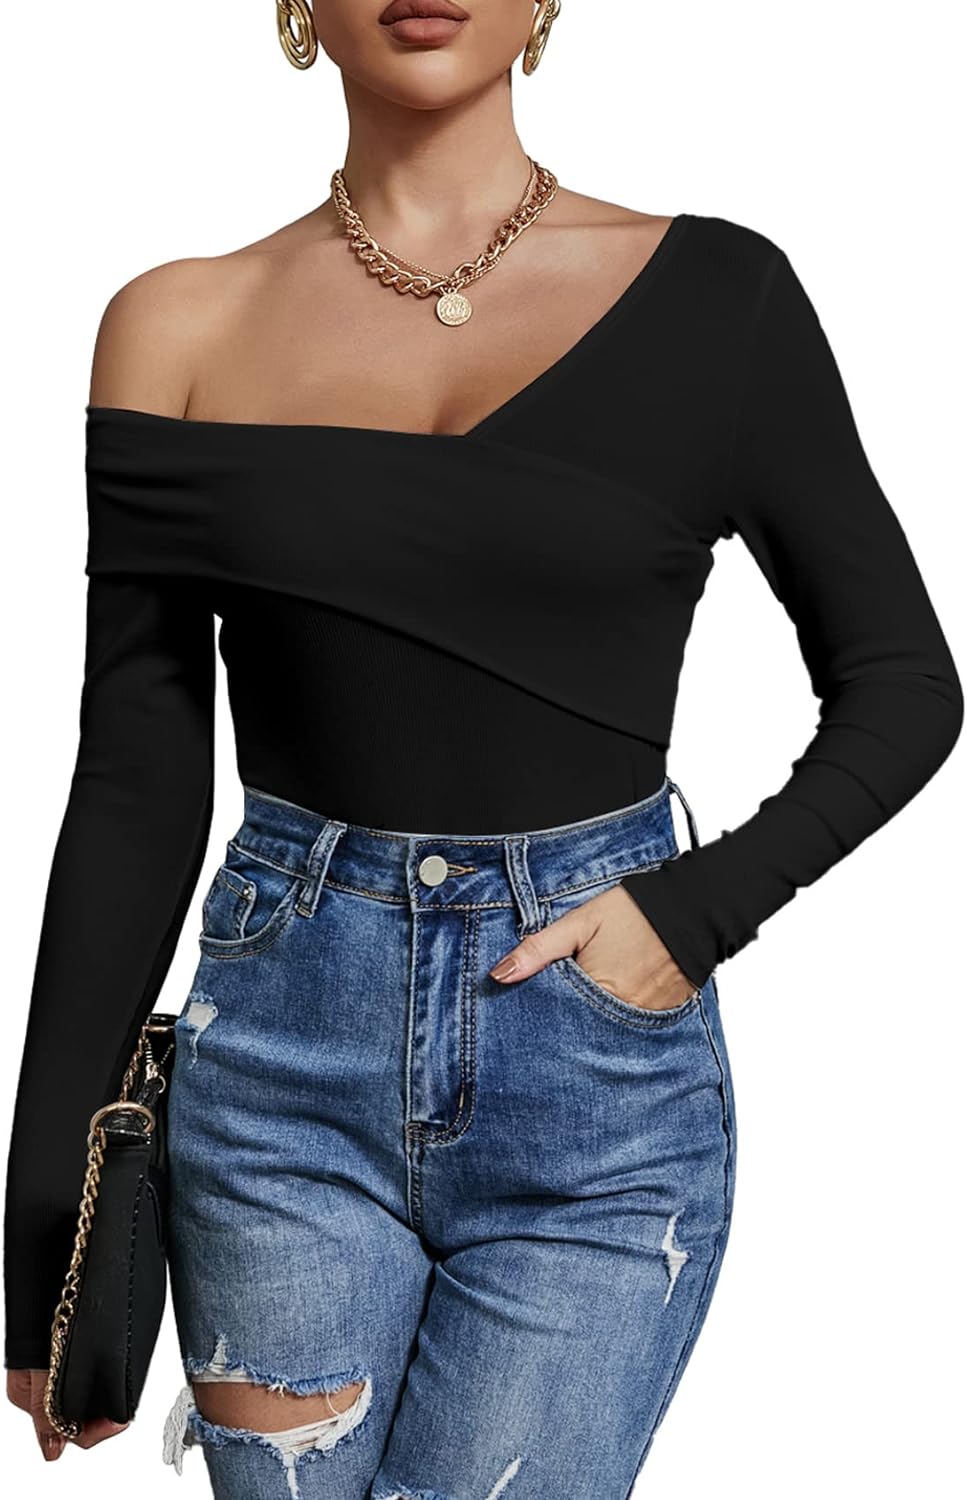 Women’s Sexy Off The Shoulder Tops Long Sleeve Cross Wrap Ribbed Knit Tee Shirt Blouse